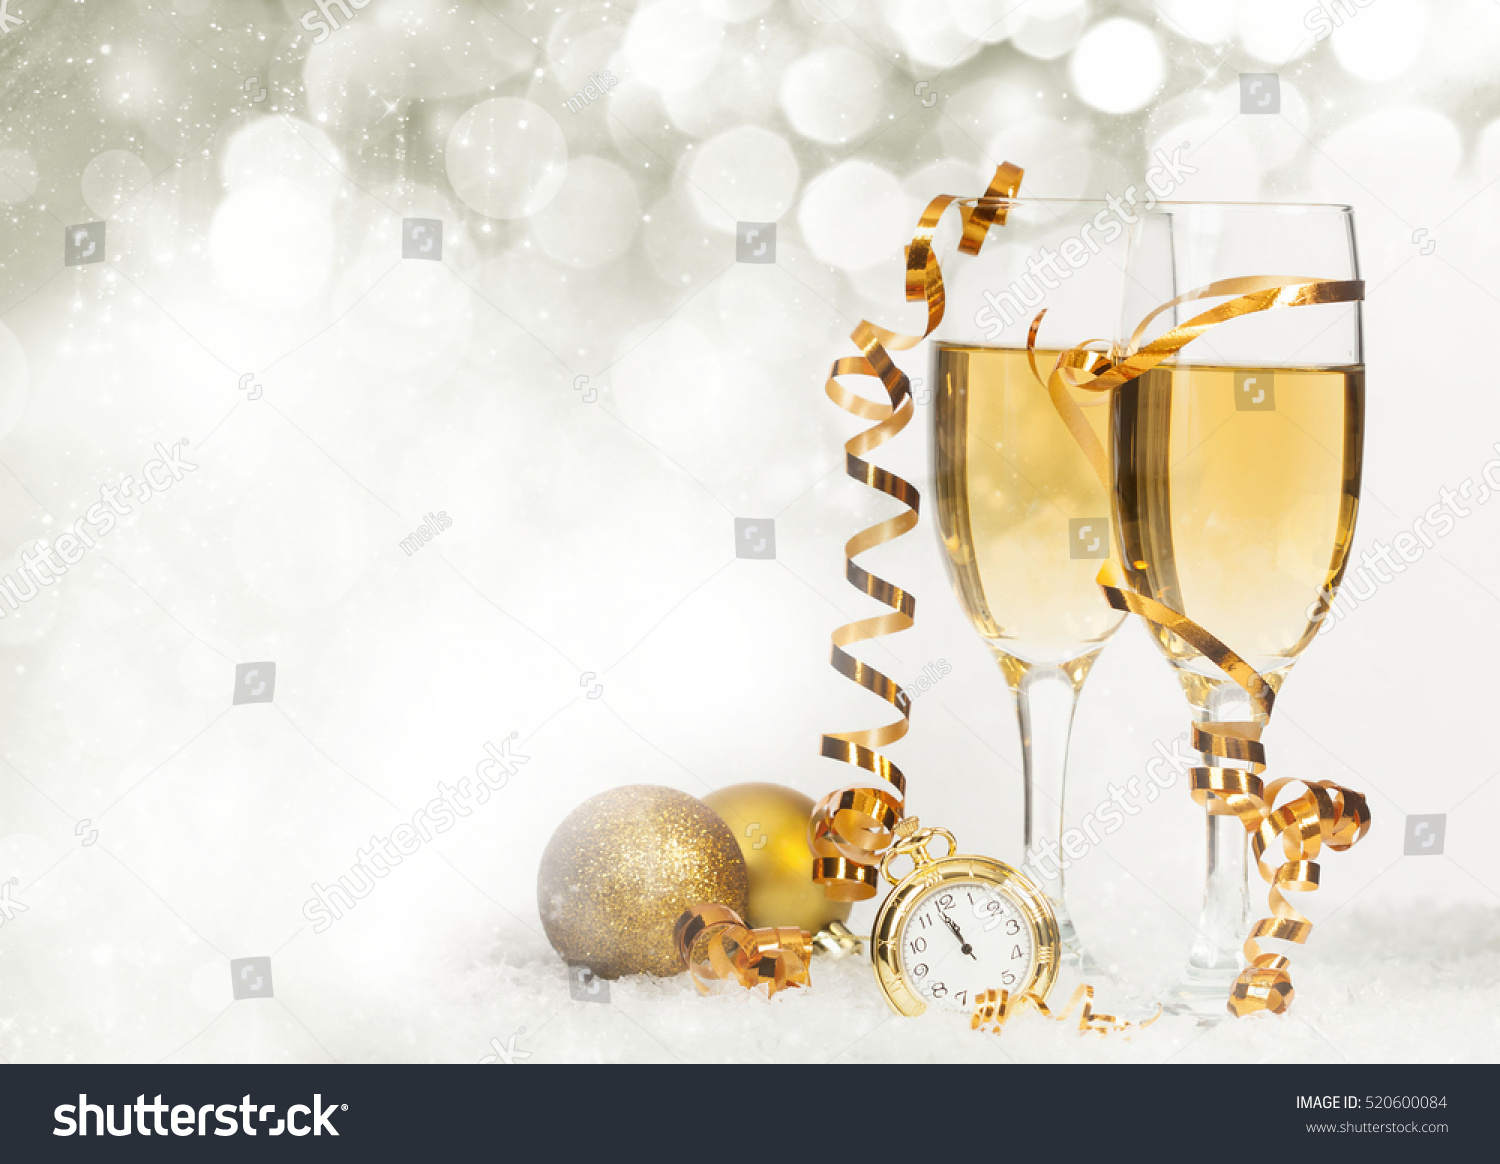 Glasses with champagne and golden Christmas balls against holiday lights - New Year background #520600084